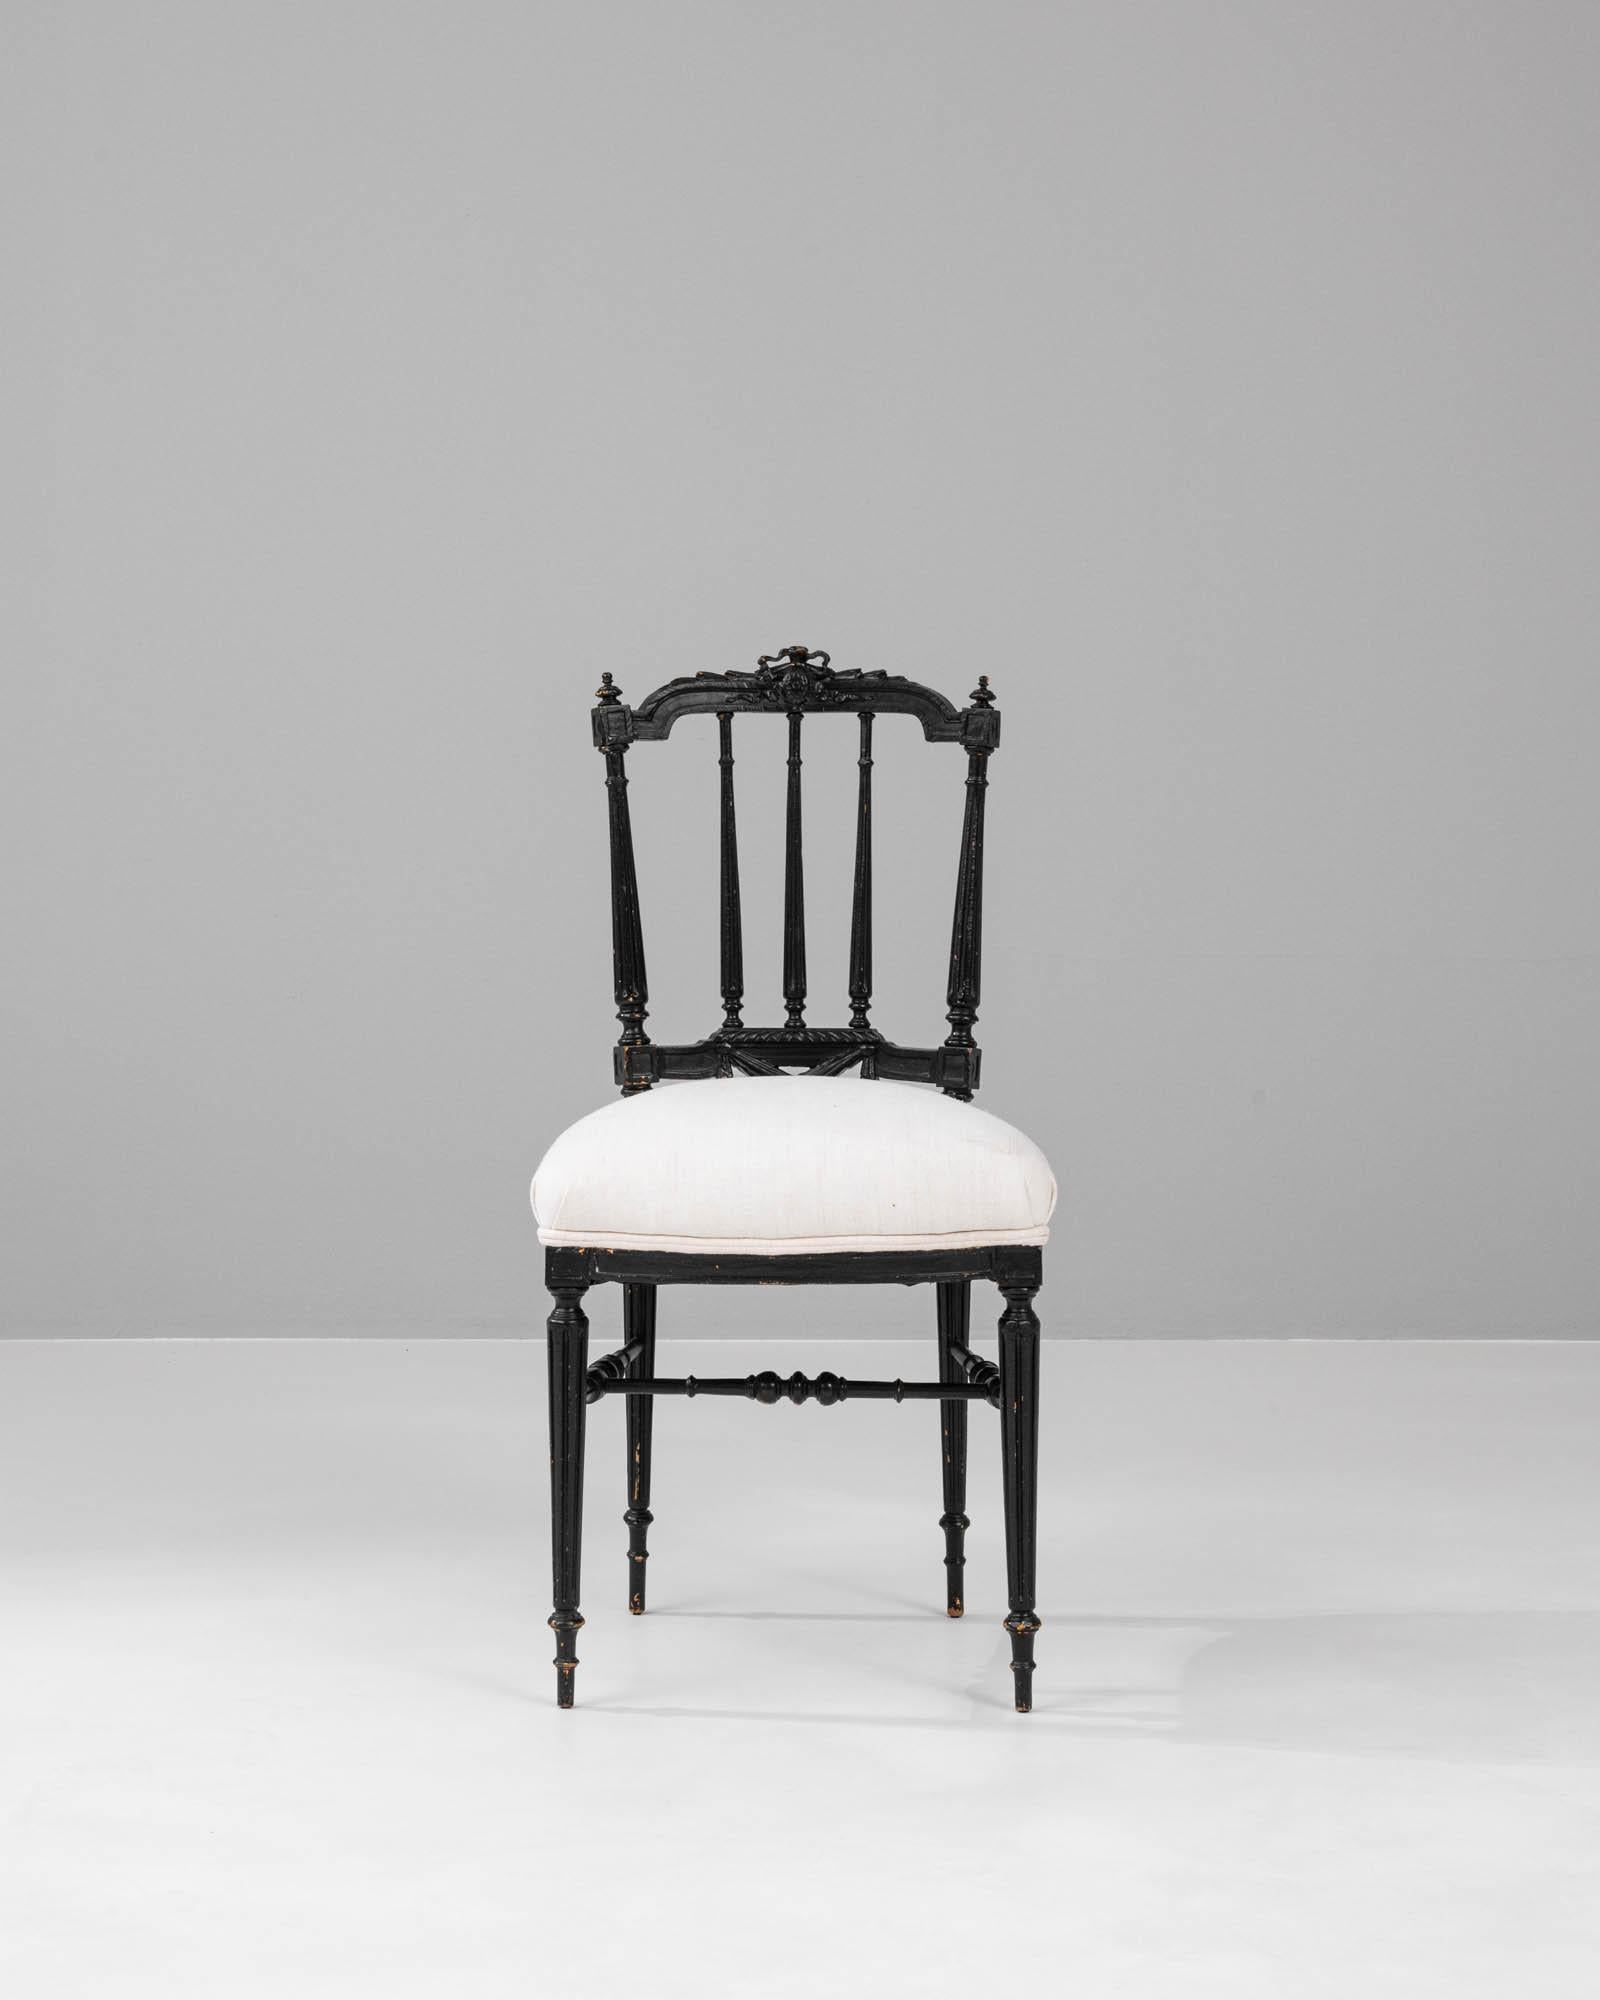 Emanating timeless elegance, this 1880s French wooden chair boasts an exquisite juxtaposition of the era's charm and a modern sensibility. The chair's high back is punctuated with slender spindles, capped with dainty finials that exude a gothic